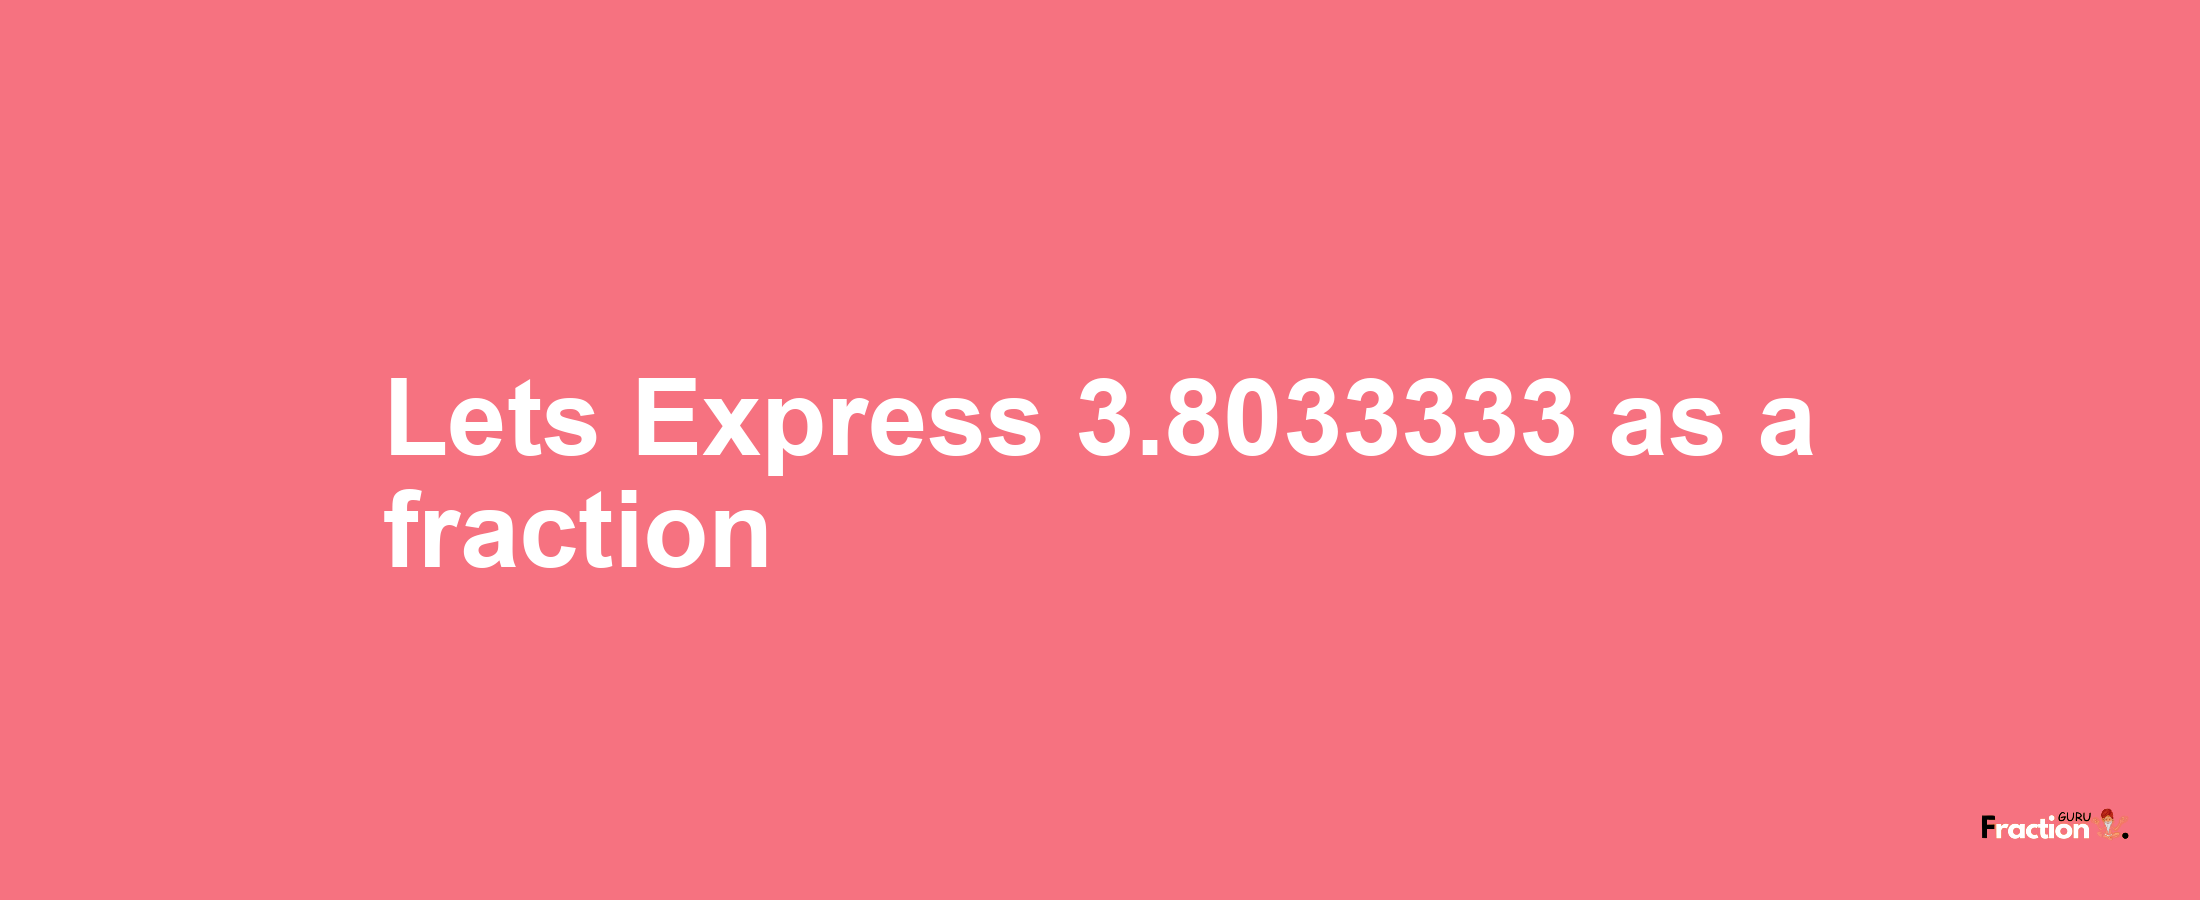 Lets Express 3.8033333 as afraction